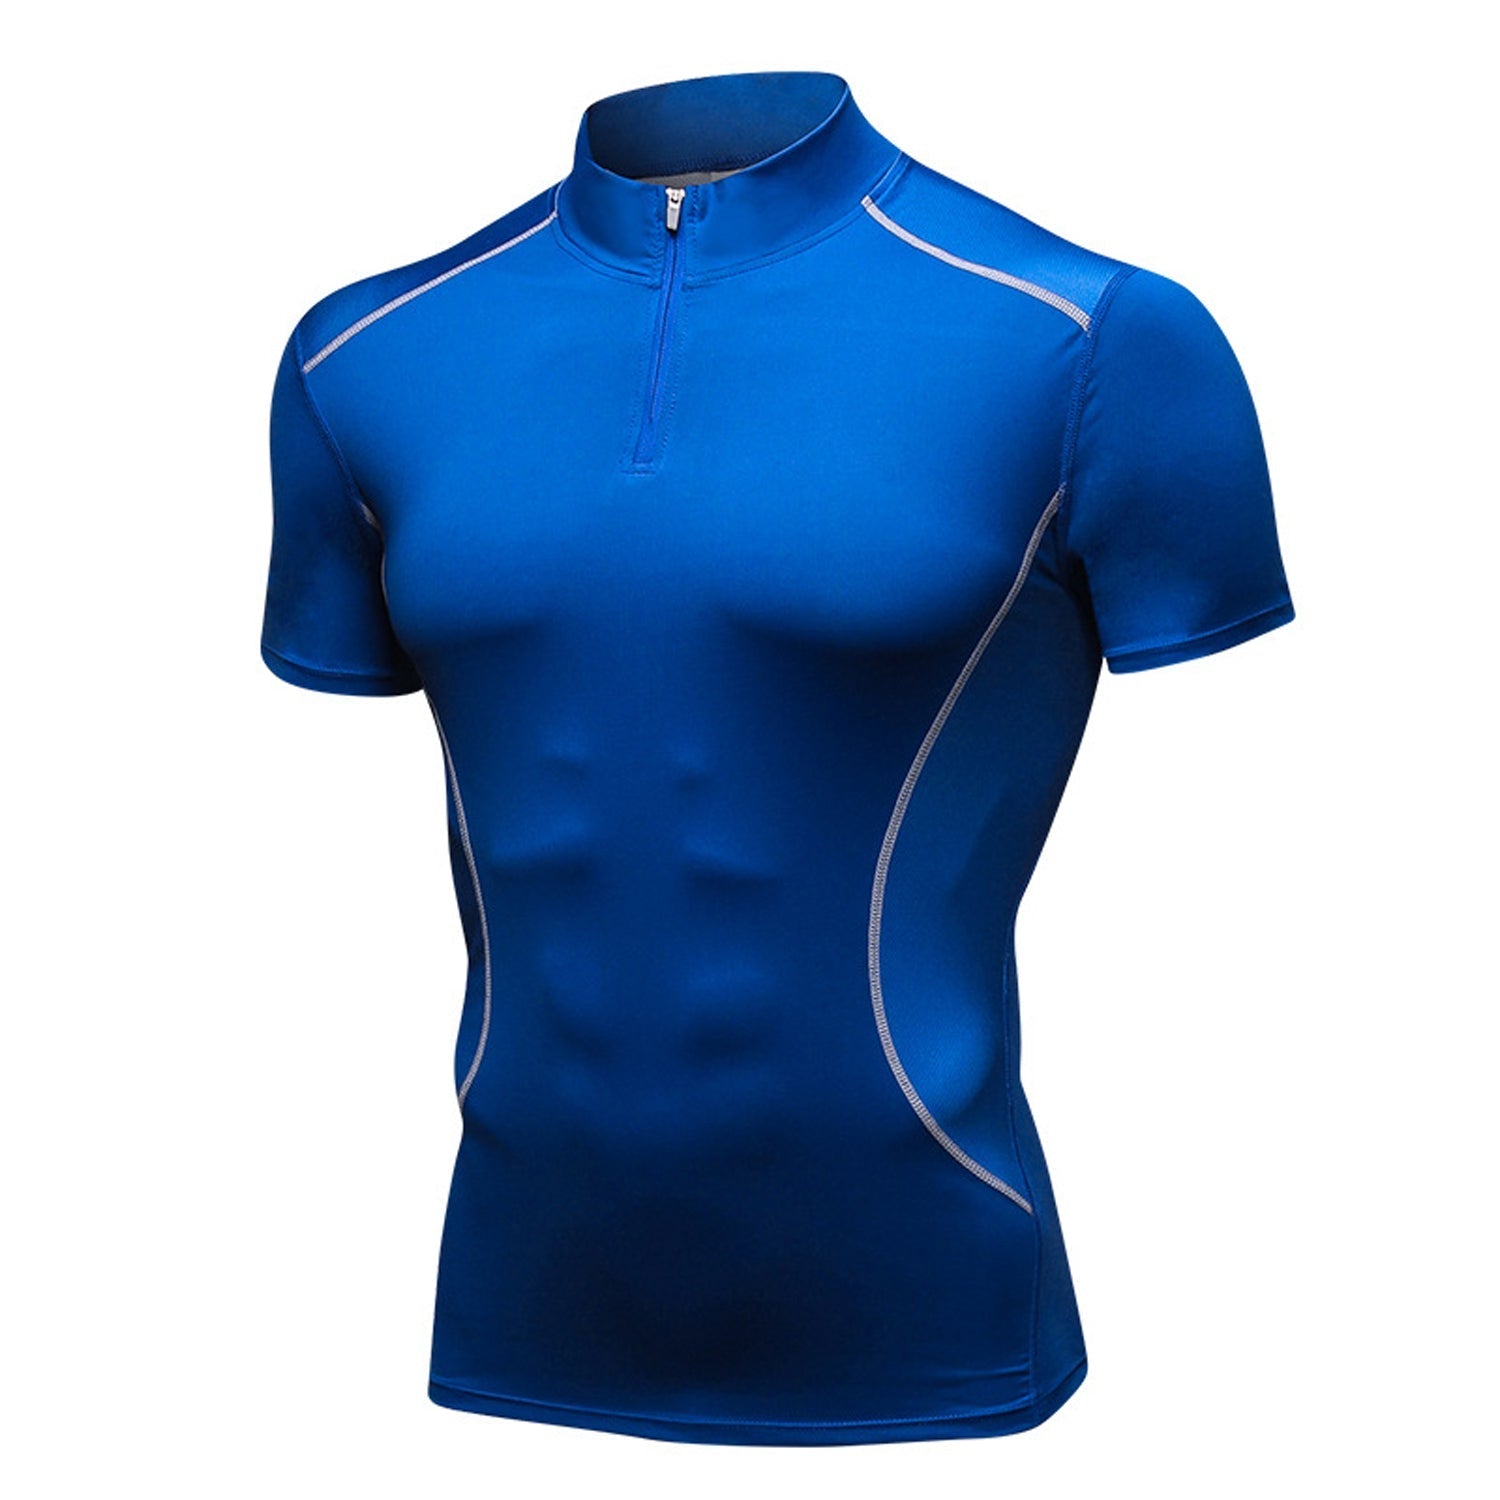 Mens Short Sleeve Compression Shirts 1/4 Zip Cool Quick-Dry